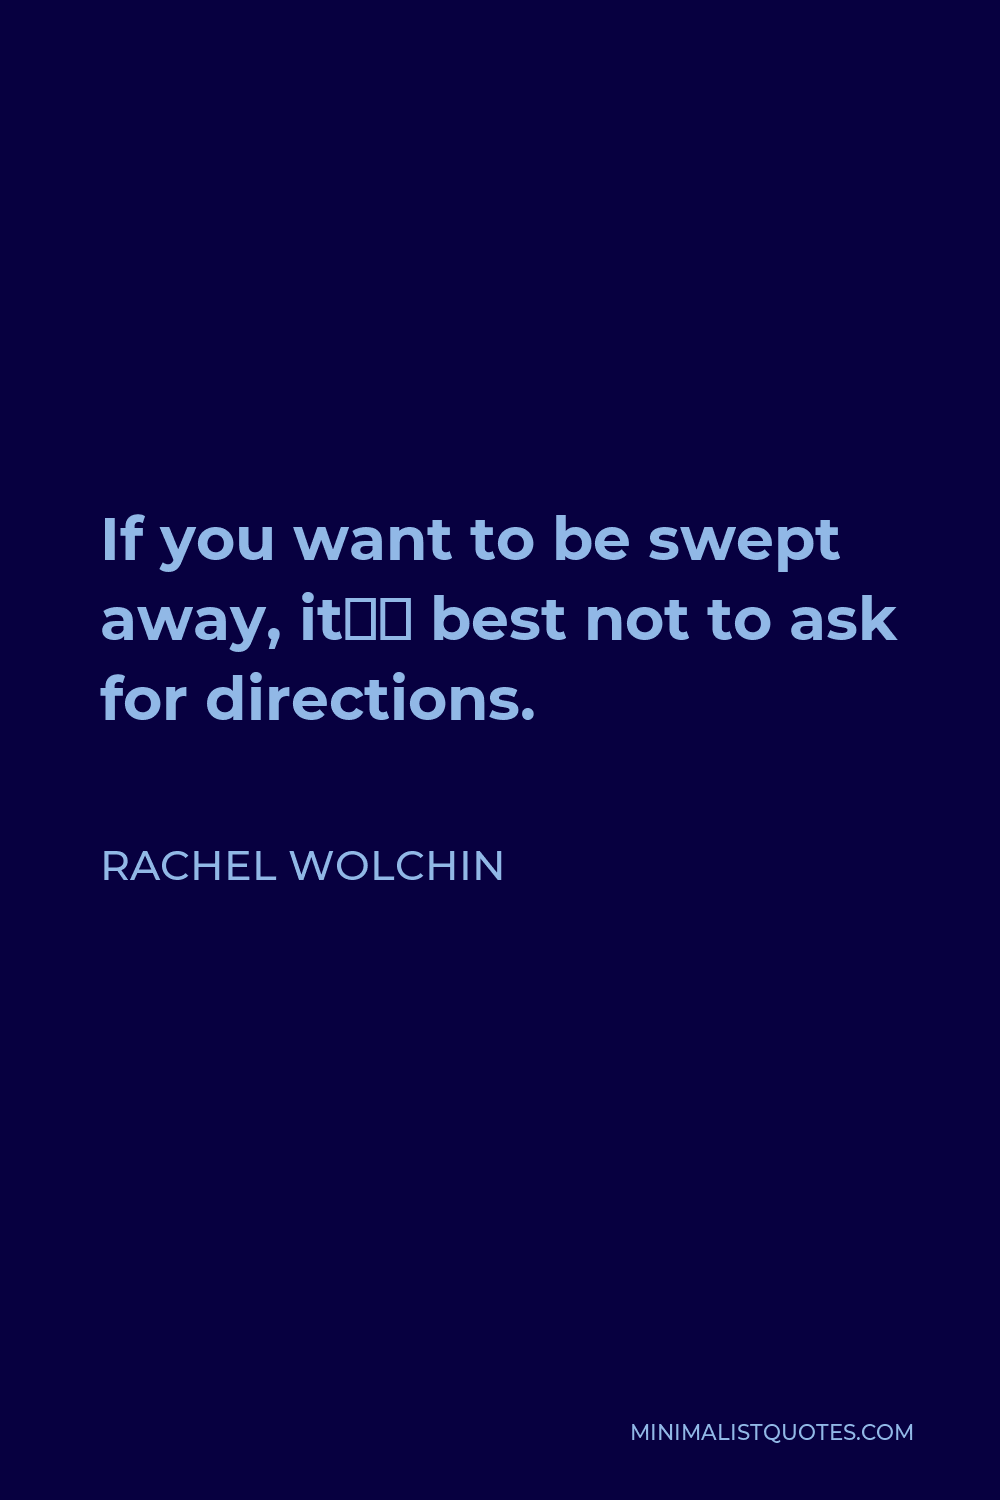 Rachel Wolchin Quote - If you want to be swept away, it’s best not to ask for directions.